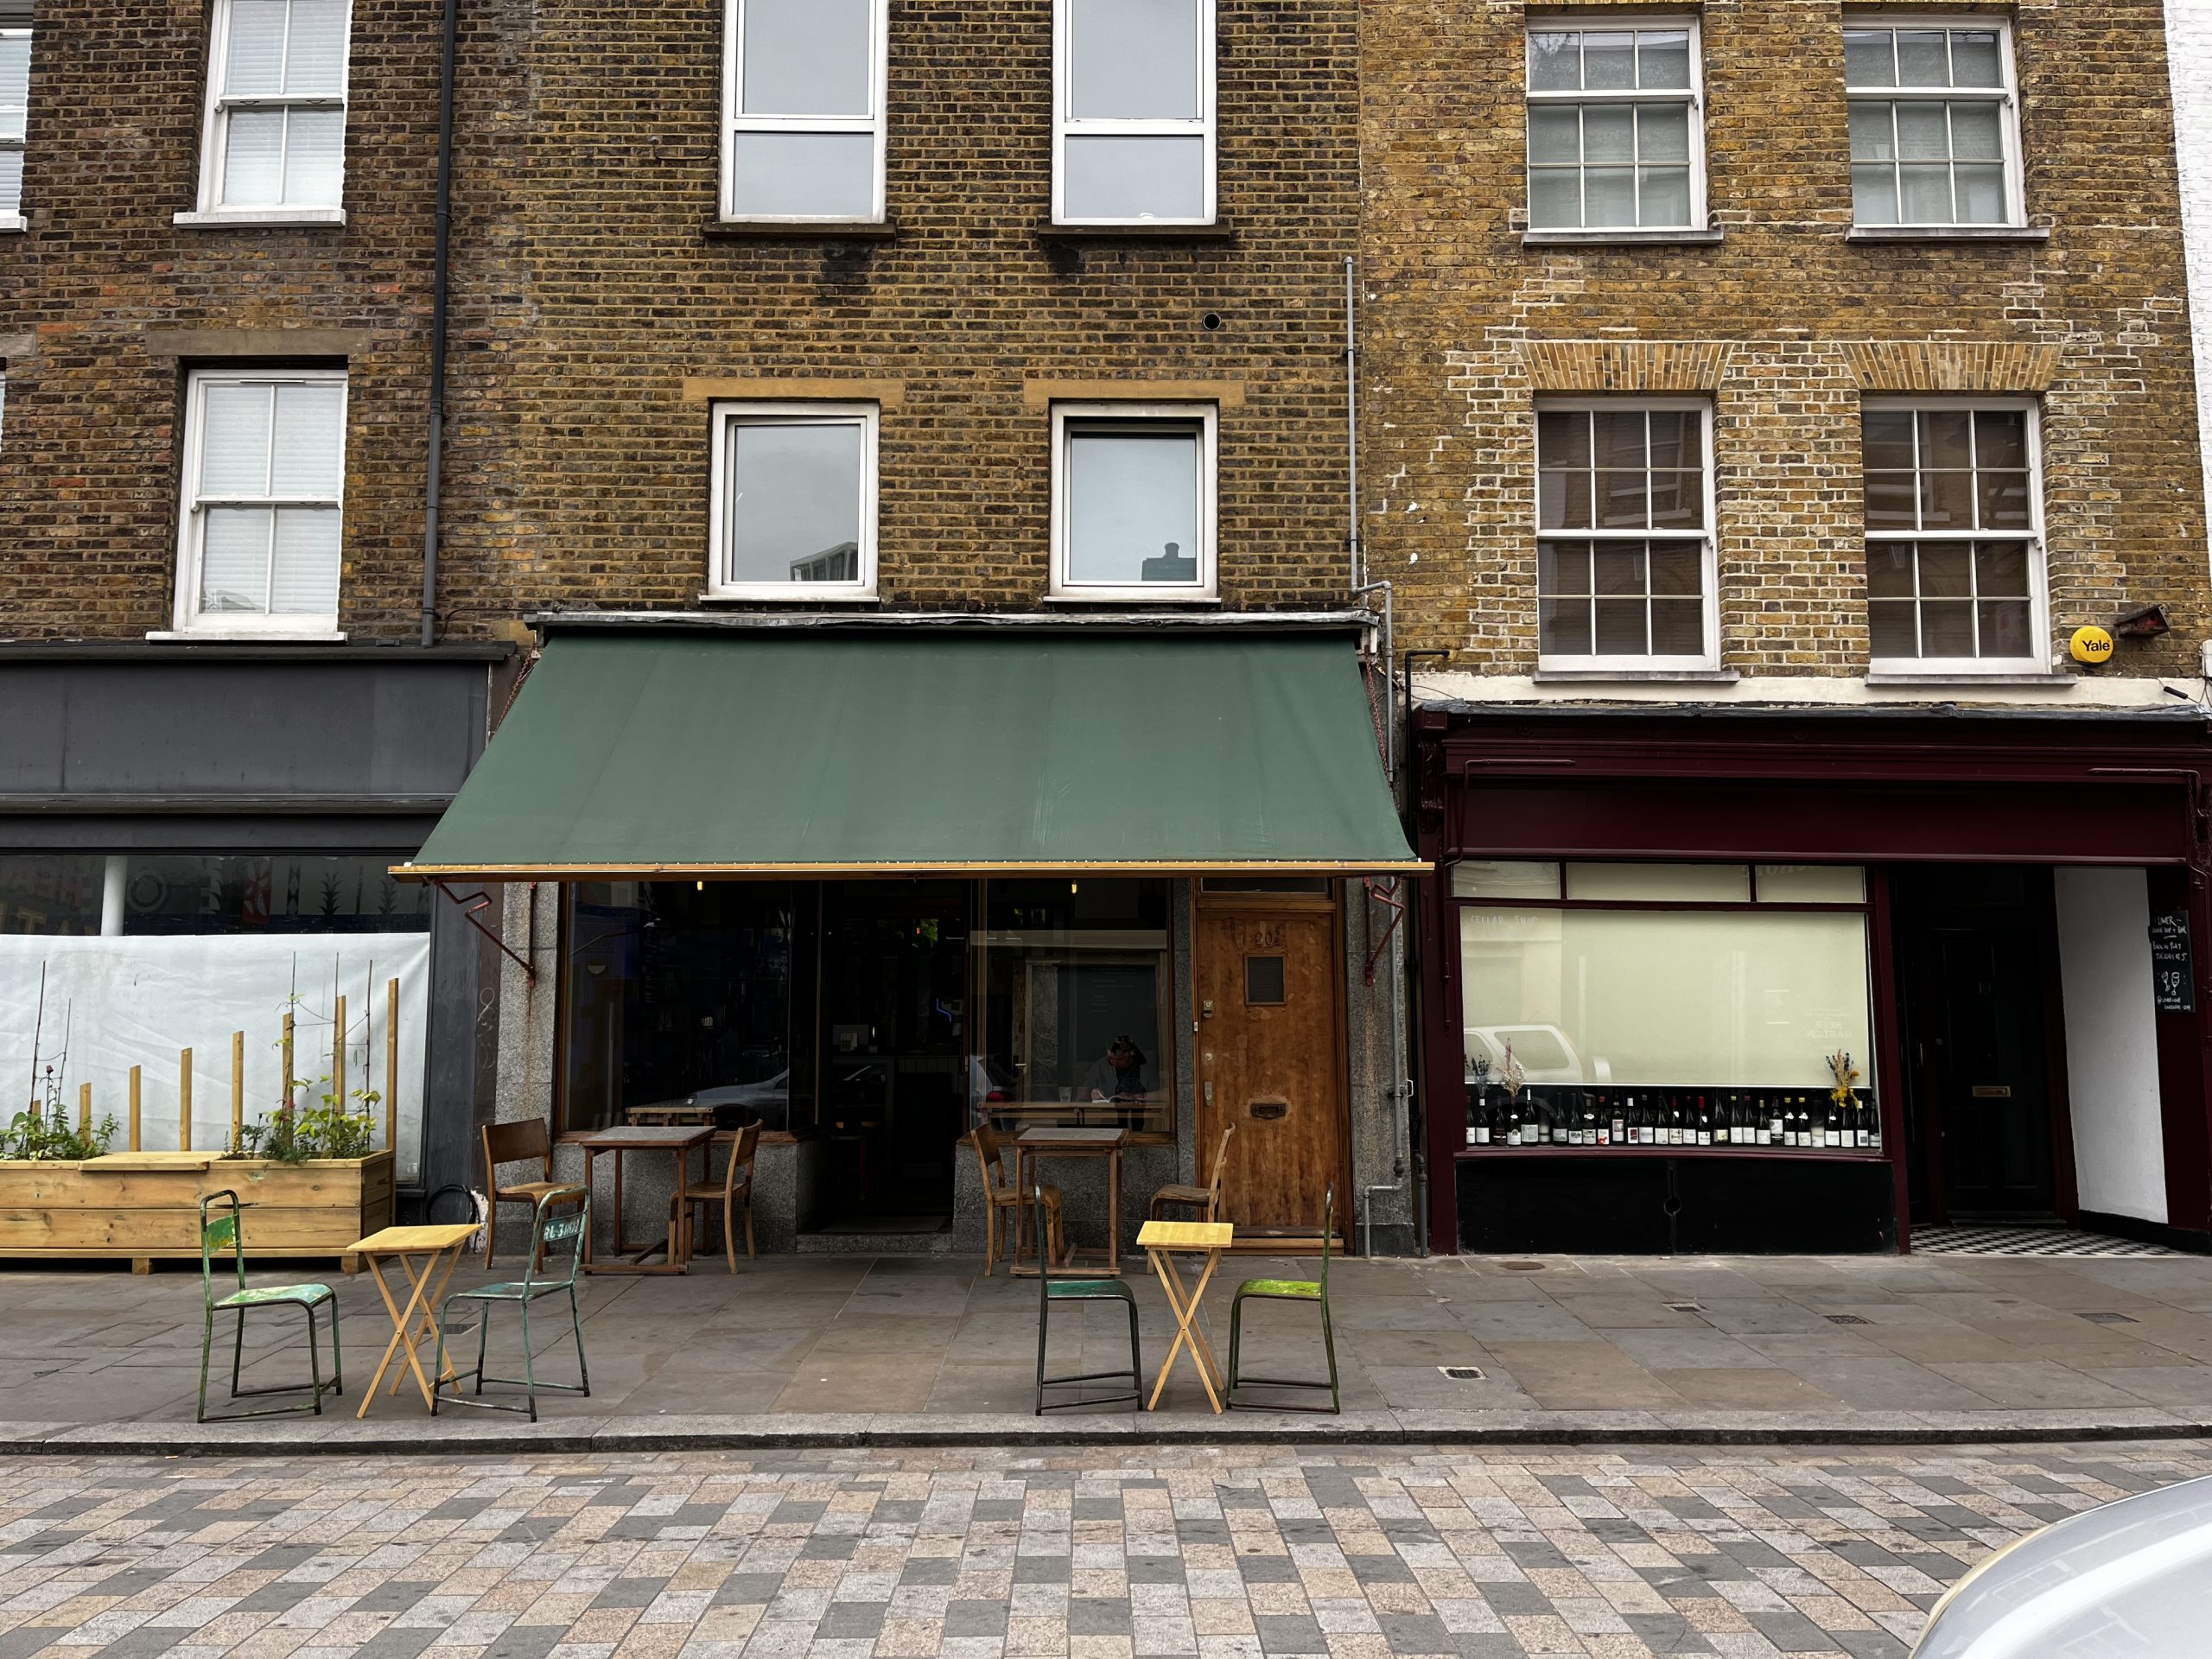 Featured Post Image - 10 reasons to visit Lower Marsh, SE1